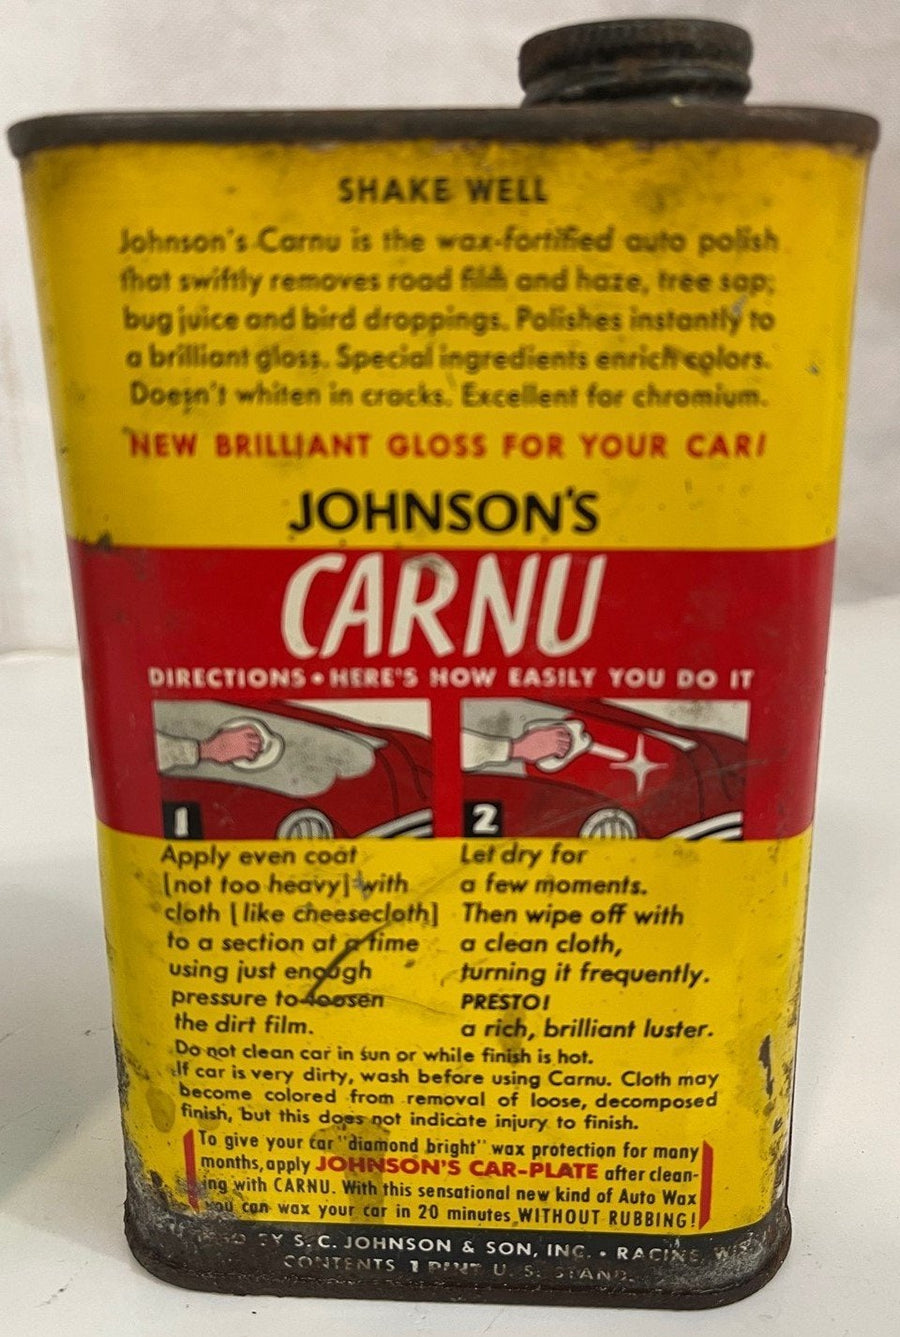 Vintage Car Skin and Johnson's CarNu Reconditioner and Gloss